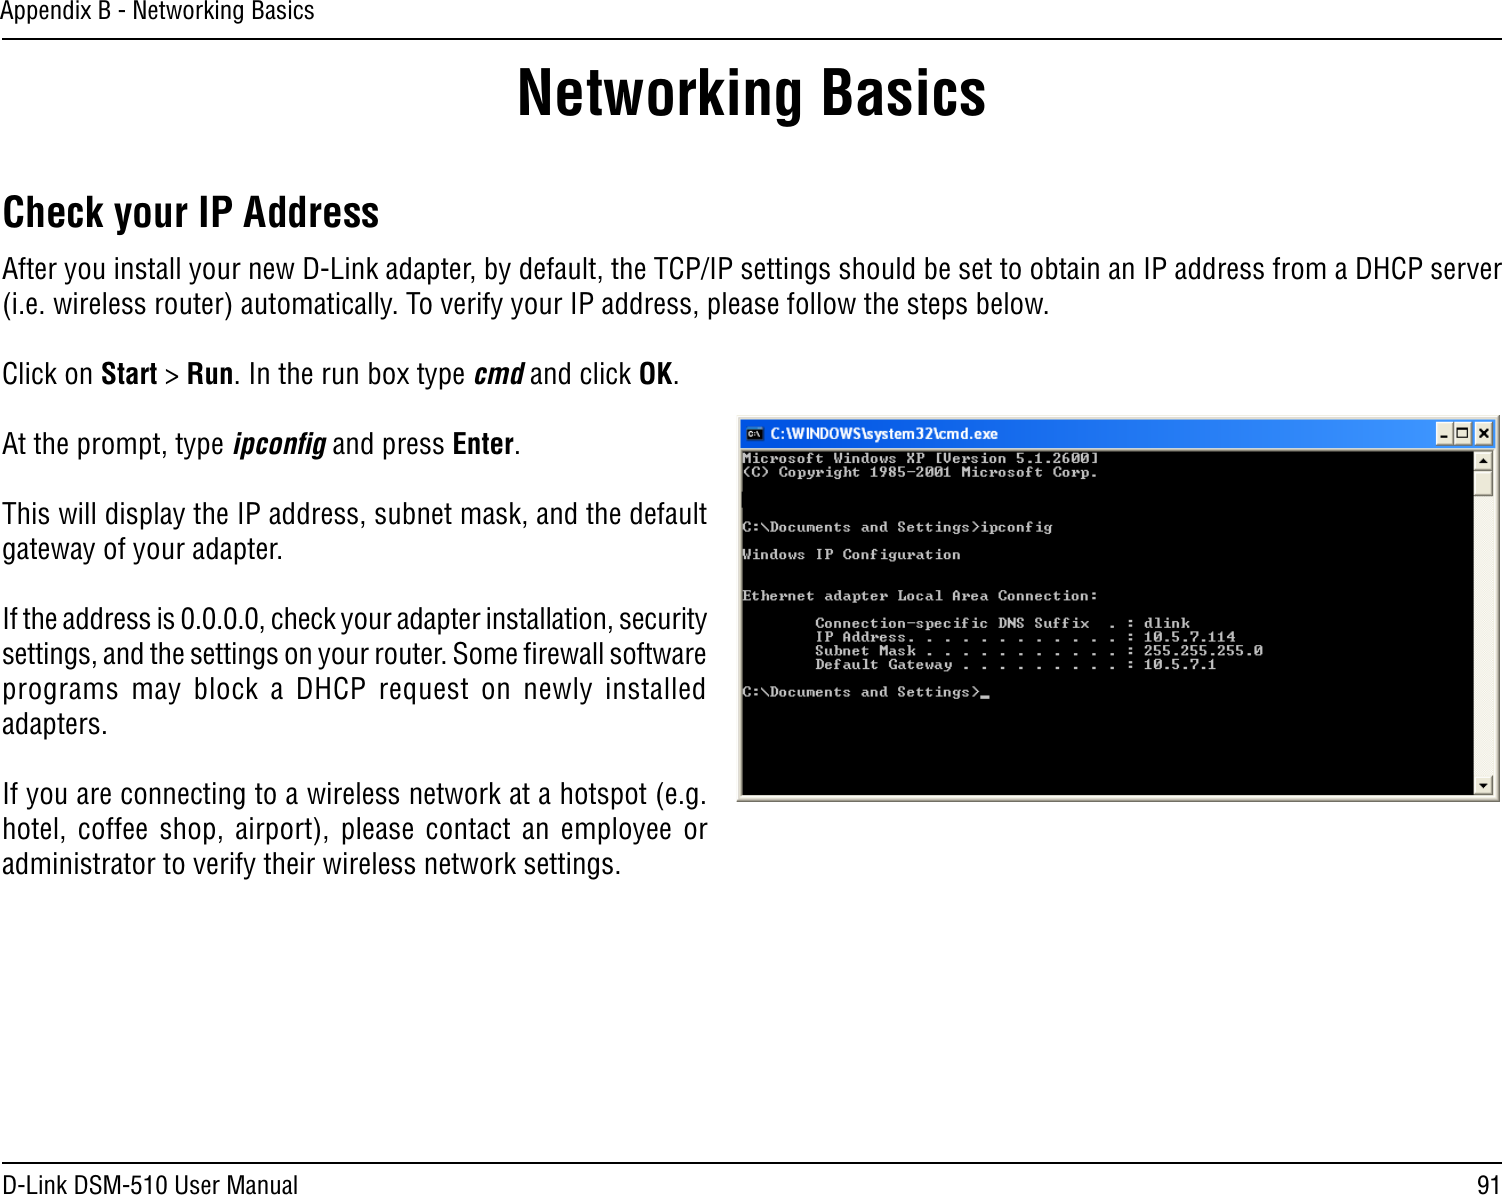 91D-Link DSM-510 User ManualAppendix B - Networking BasicsNetworking BasicsCheck your IP AddressAfter you install your new D-Link adapter, by default, the TCP/IP settings should be set to obtain an IP address from a DHCP server (i.e. wireless router) automatically. To verify your IP address, please follow the steps below.Click on Start &gt; Run. In the run box type cmd and click OK.At the prompt, type ipconﬁg and press Enter.This will display the IP address, subnet mask, and the default gateway of your adapter.If the address is 0.0.0.0, check your adapter installation, security settings, and the settings on your router. Some ﬁrewall software programs  may  block  a  DHCP  request  on  newly  installed adapters. If you are connecting to a wireless network at a hotspot (e.g. hotel,  coffee  shop,  airport),  please  contact  an  employee  or administrator to verify their wireless network settings.